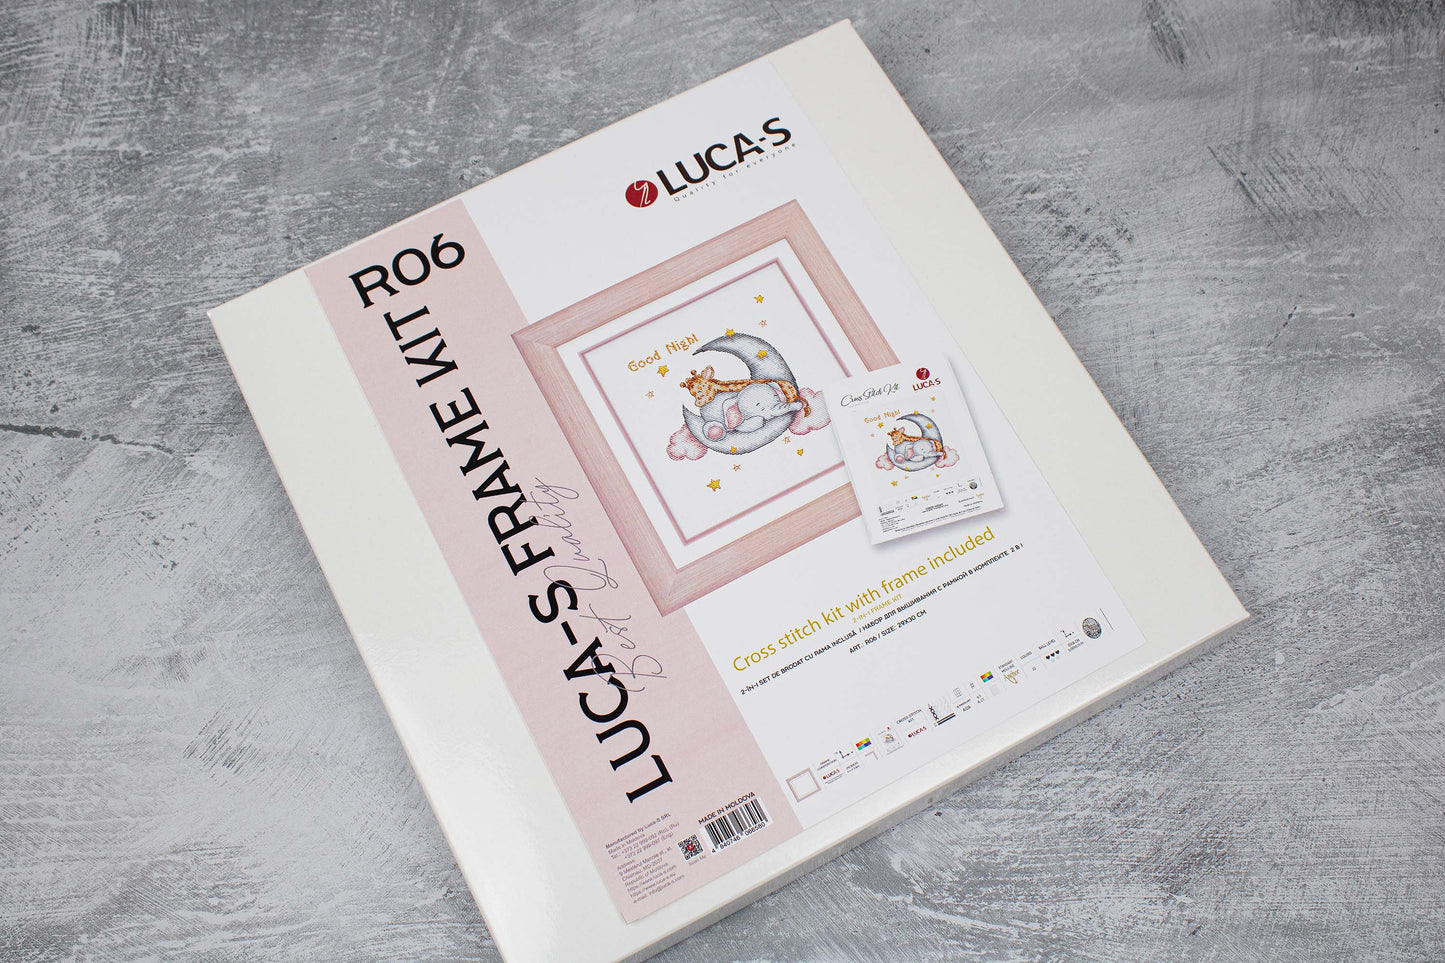 Cross Stitch Kit with Frame Included - Luca-S, R06